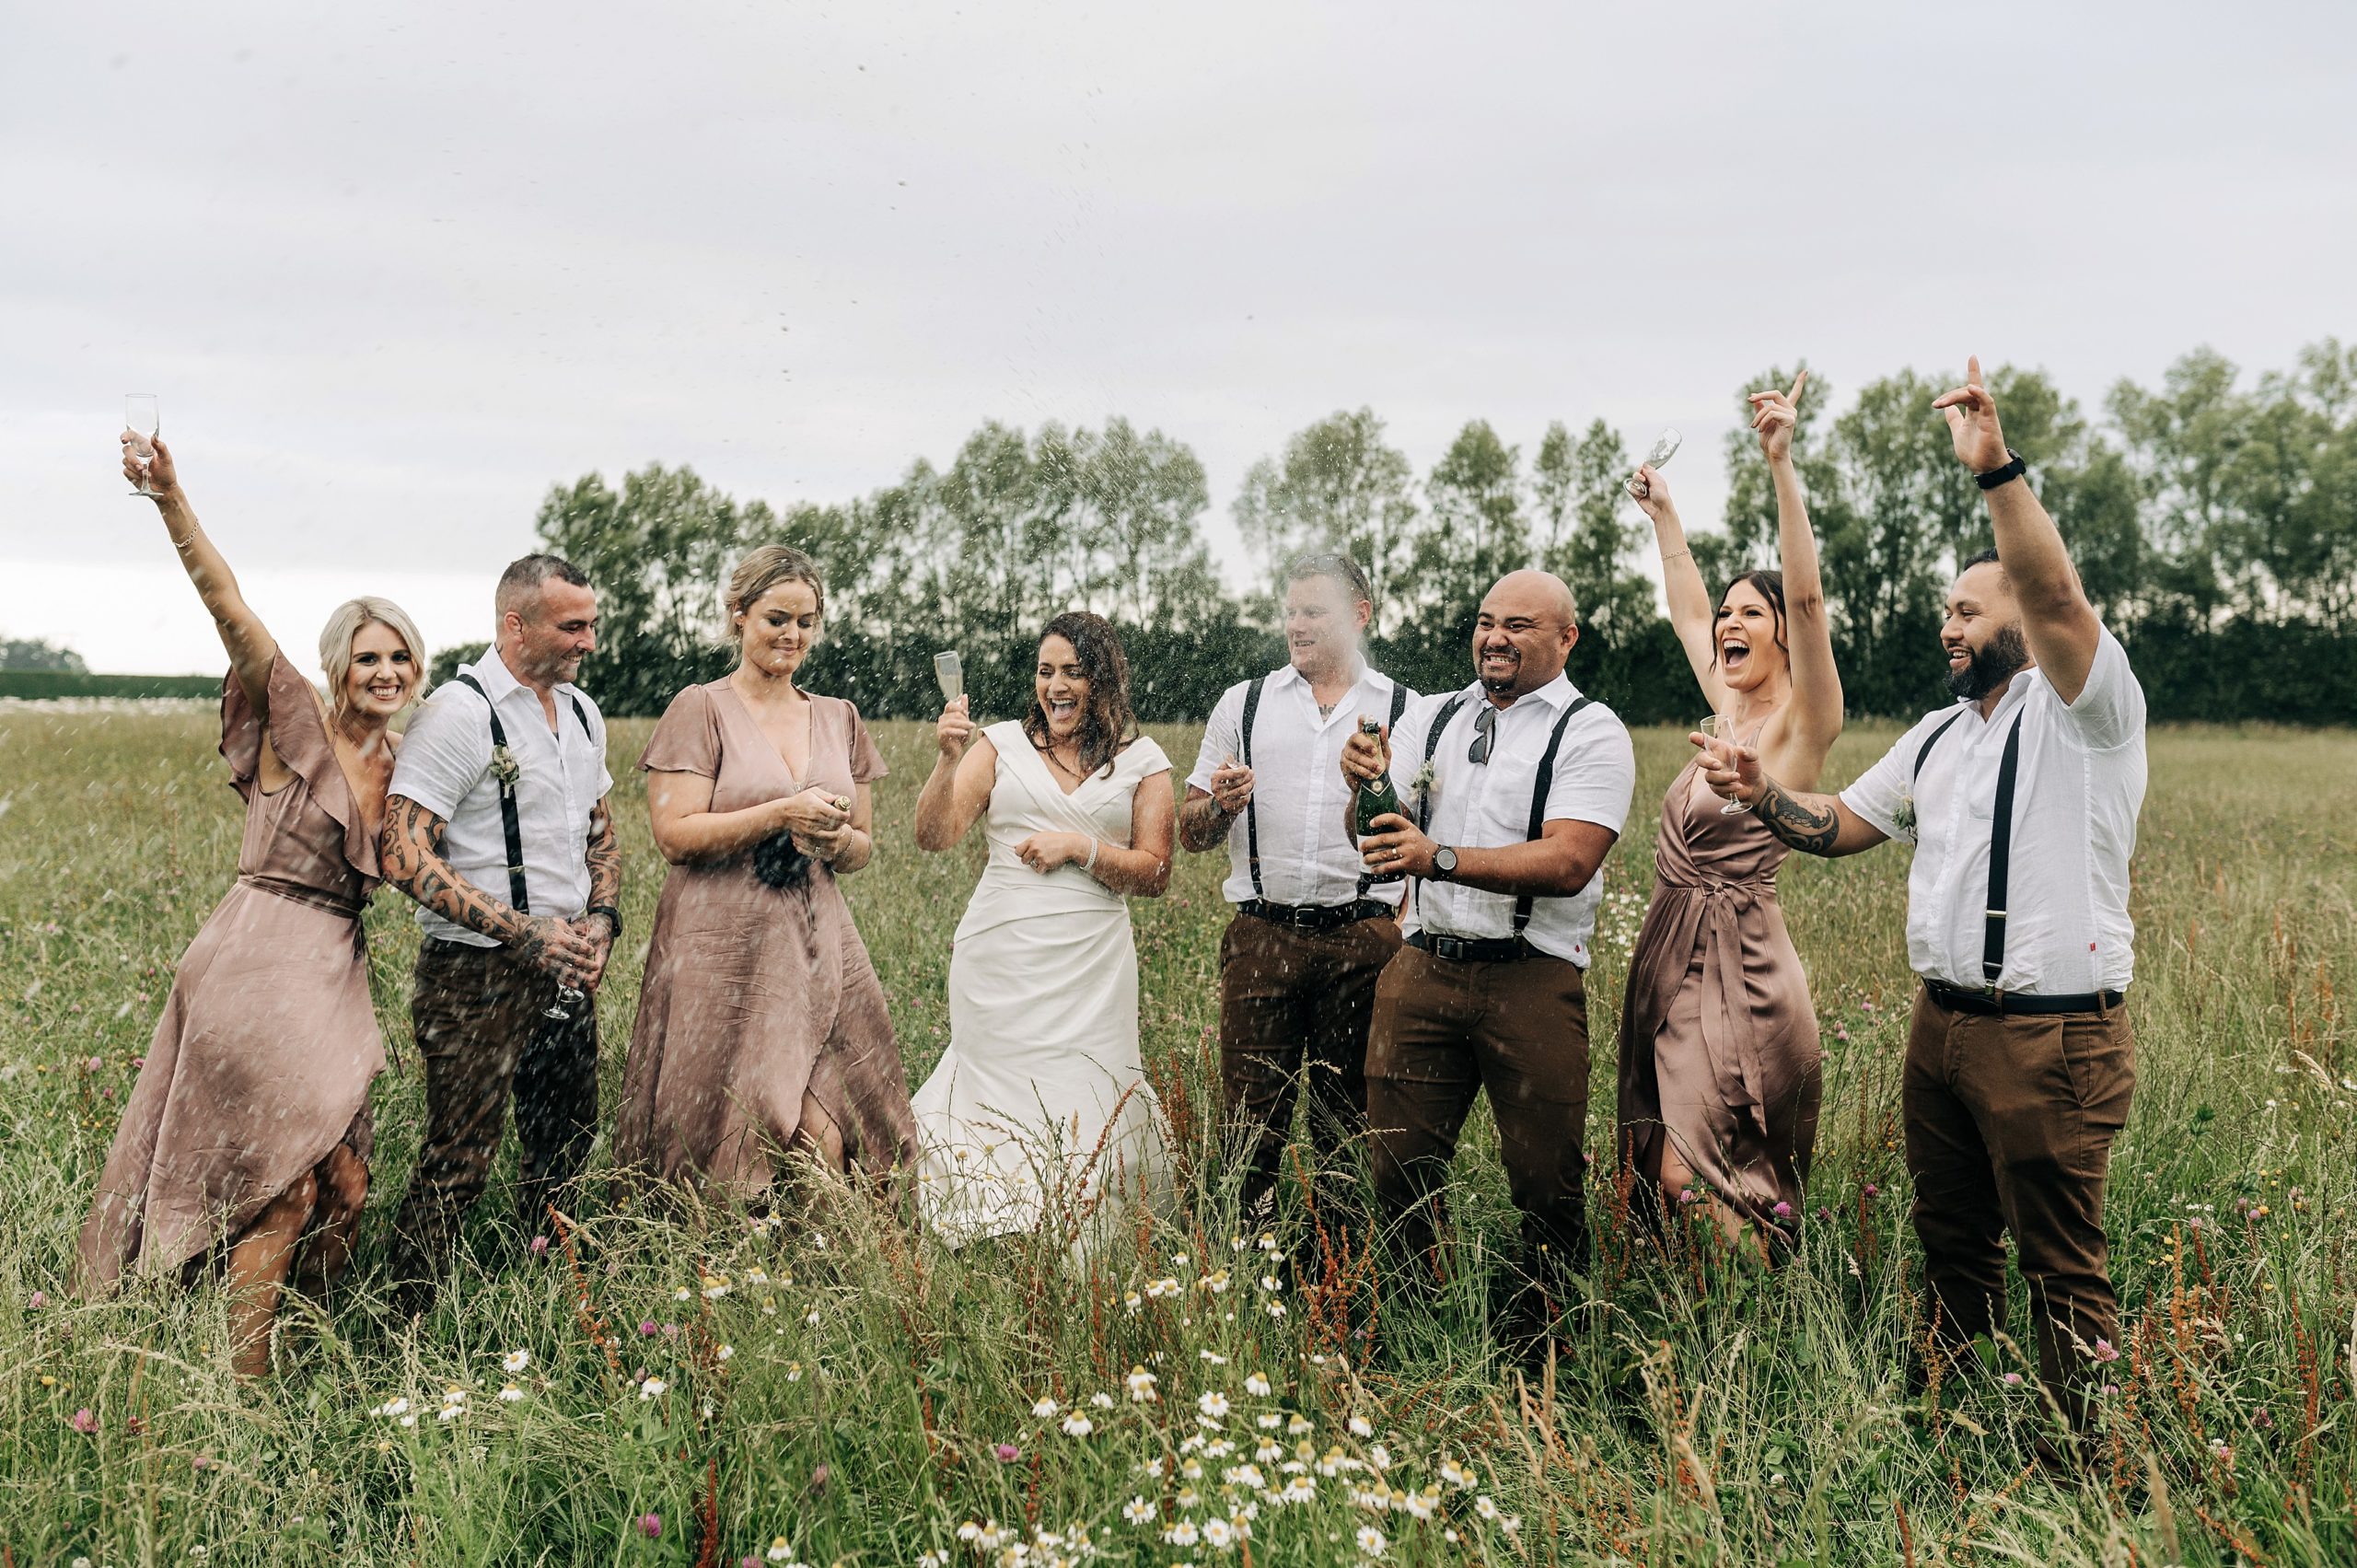 champagne wedding party bridesmaids groomsmen spray laughter christchurch sunset happy cheer candid party celebrate